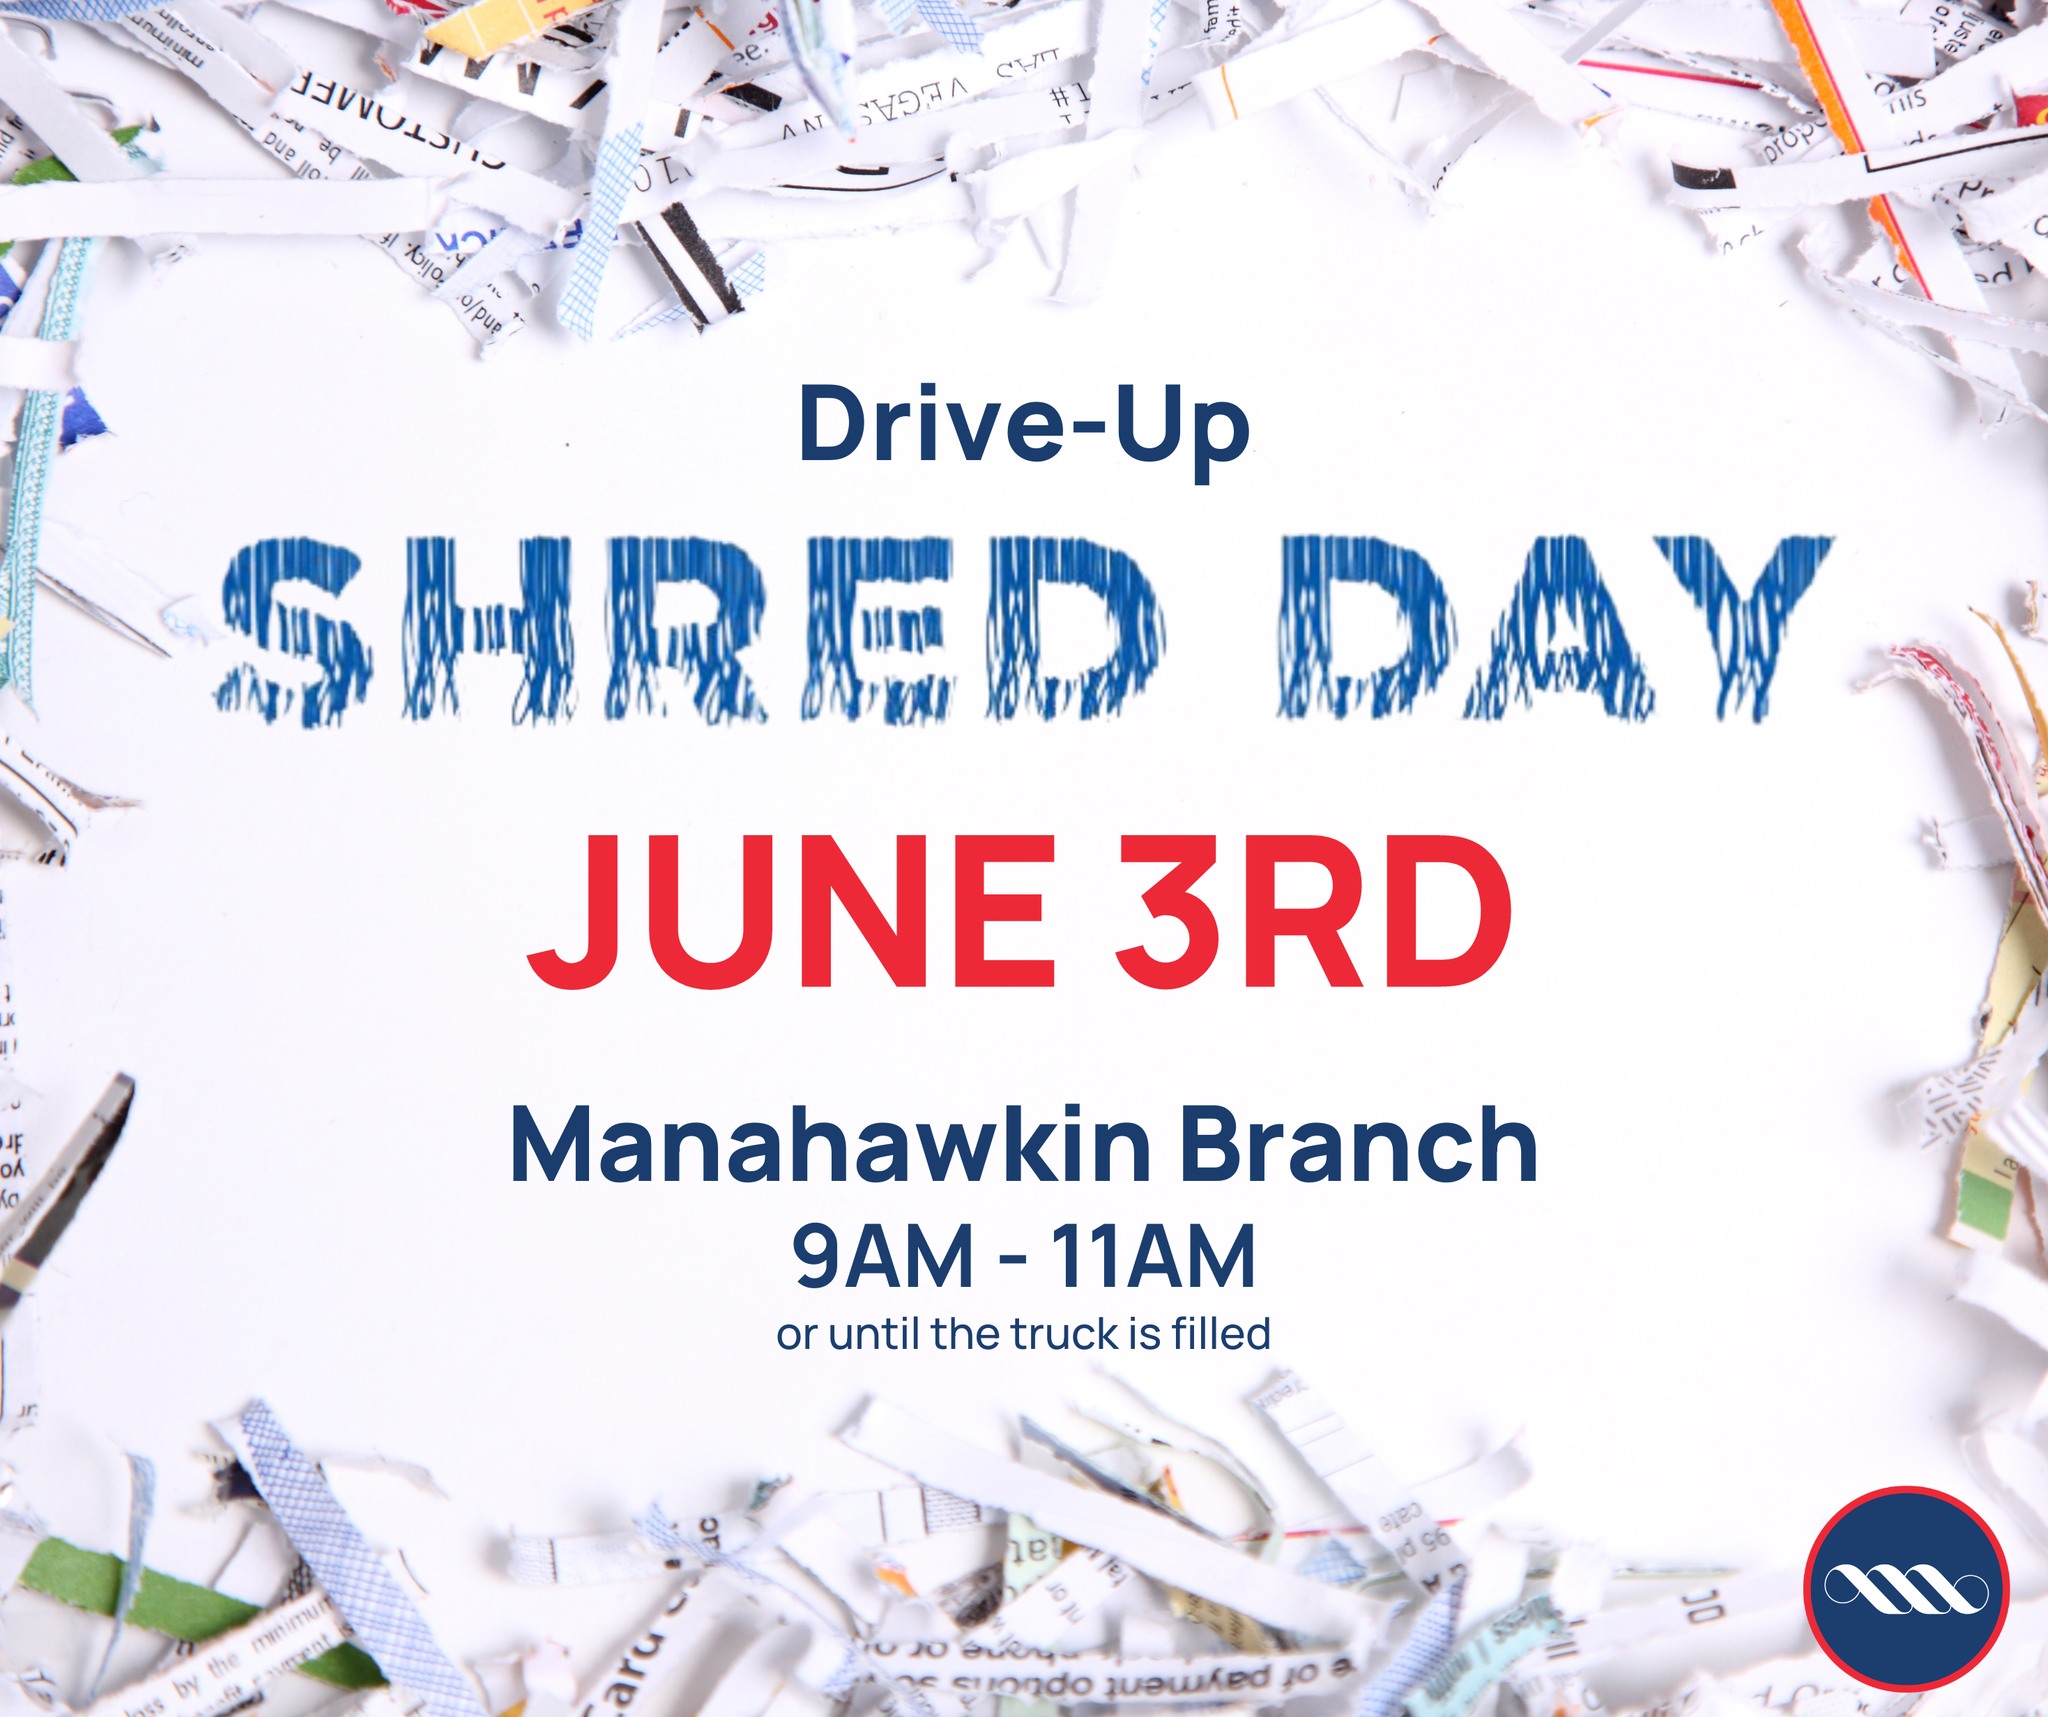 Shred Day at our Manahawkin Branch